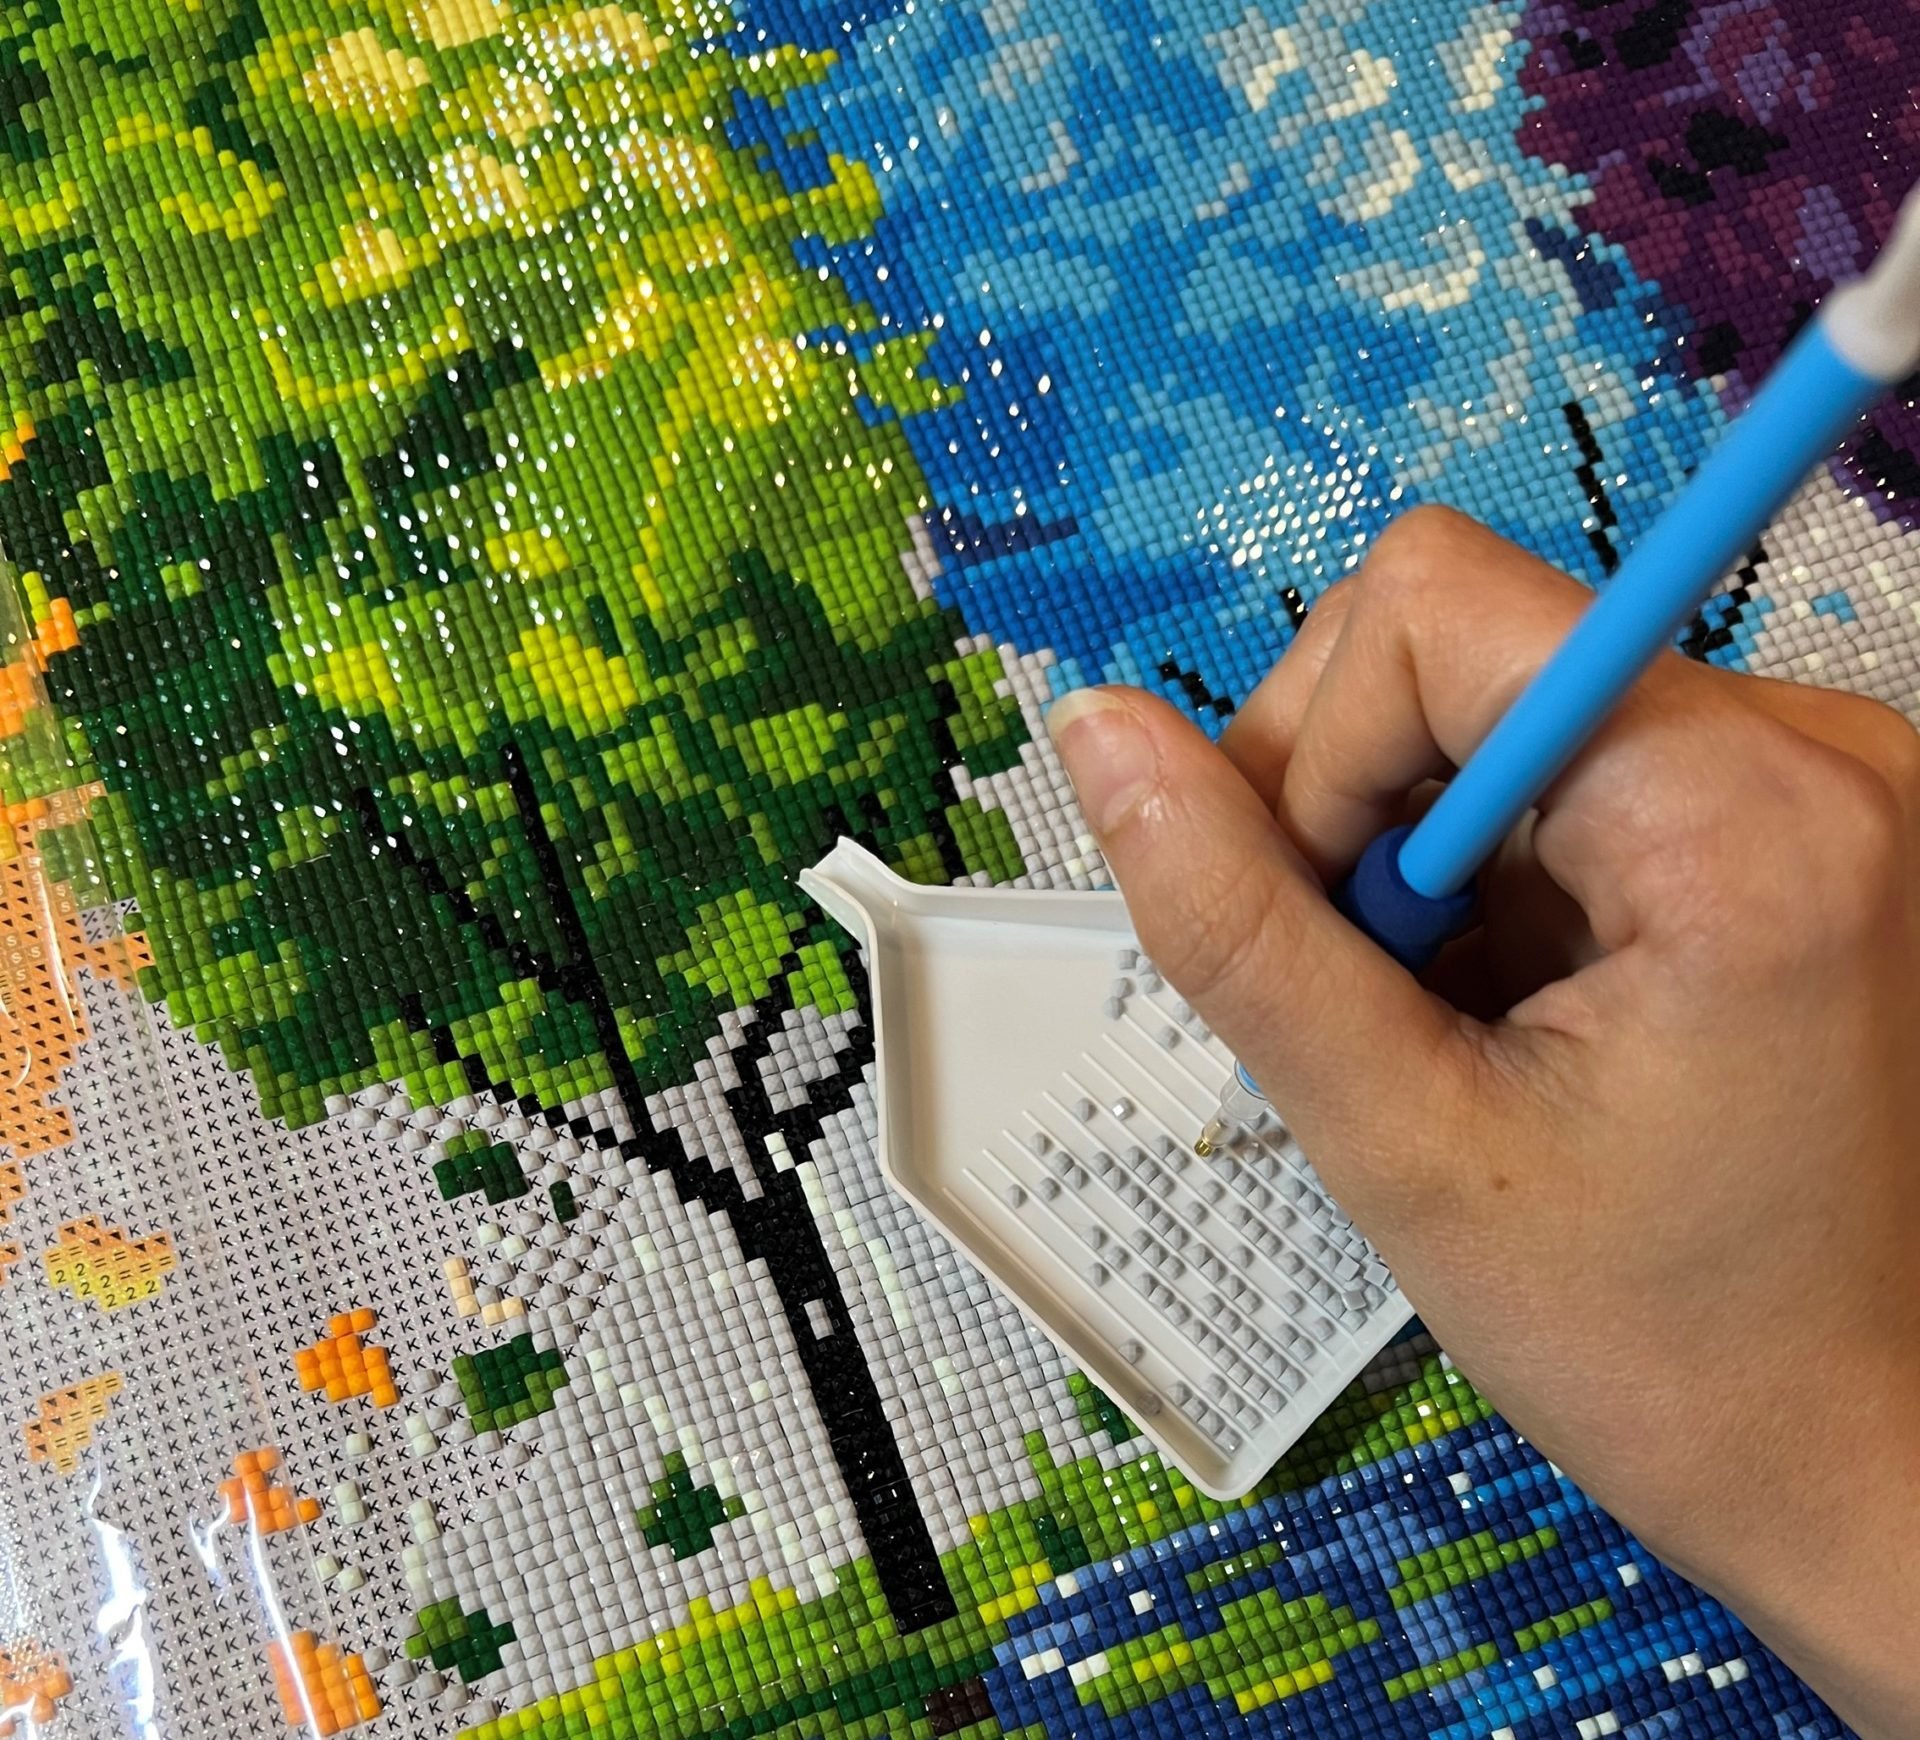 Diamond Painting – An Easy to Learn Crafting Project - Empowerline